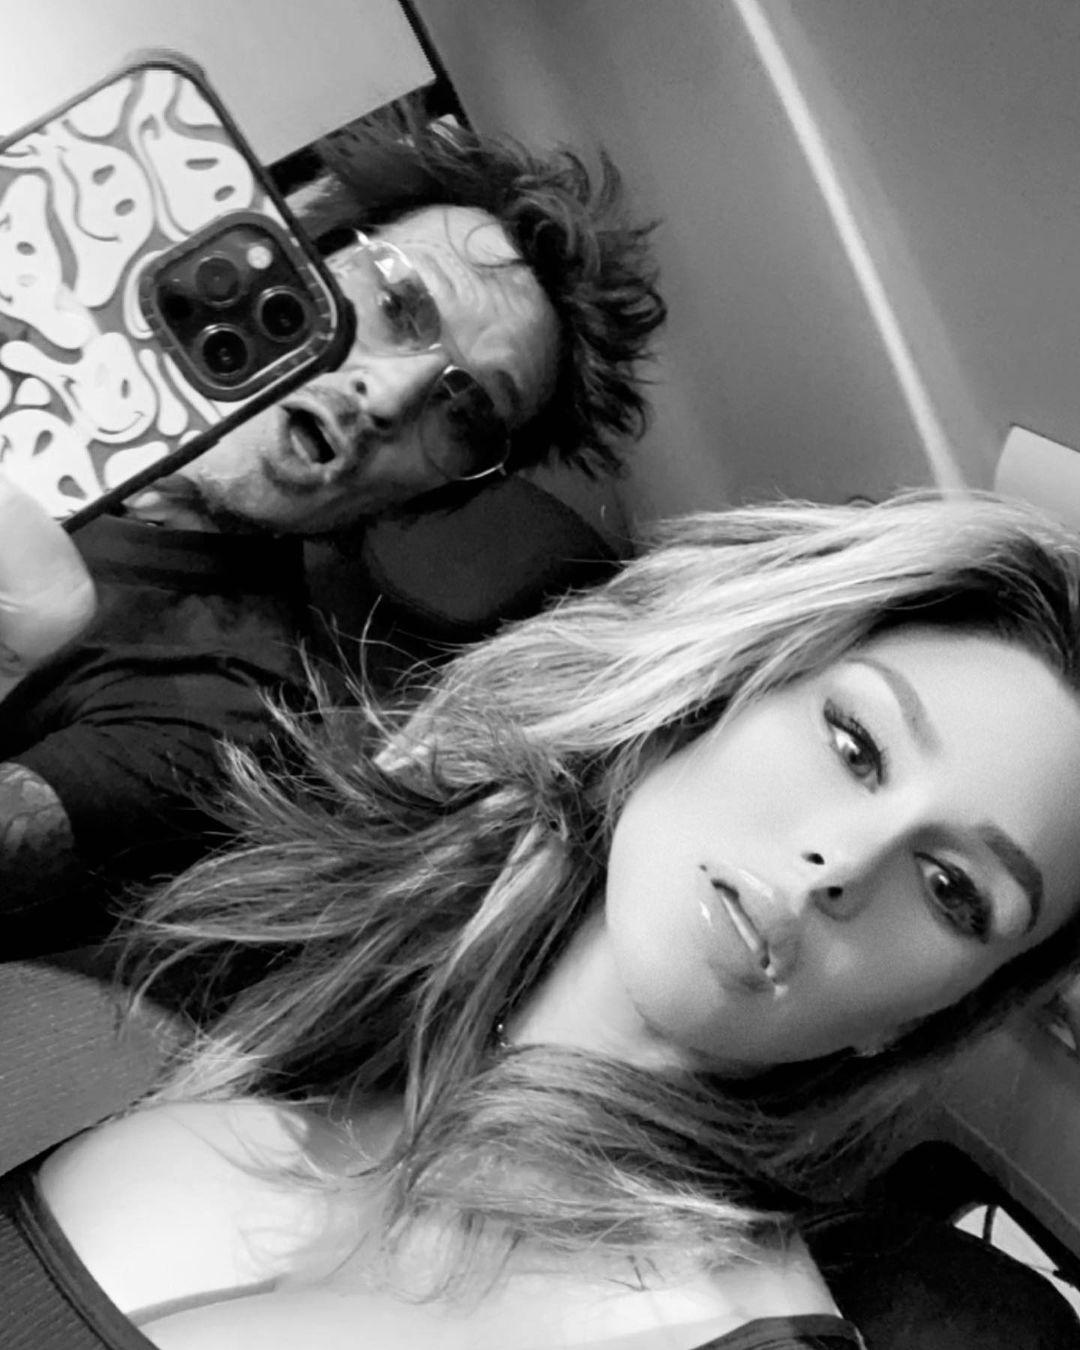 Tommy Lee's Wife Brittany Furlan Is Third In Line For Love From The Rocker